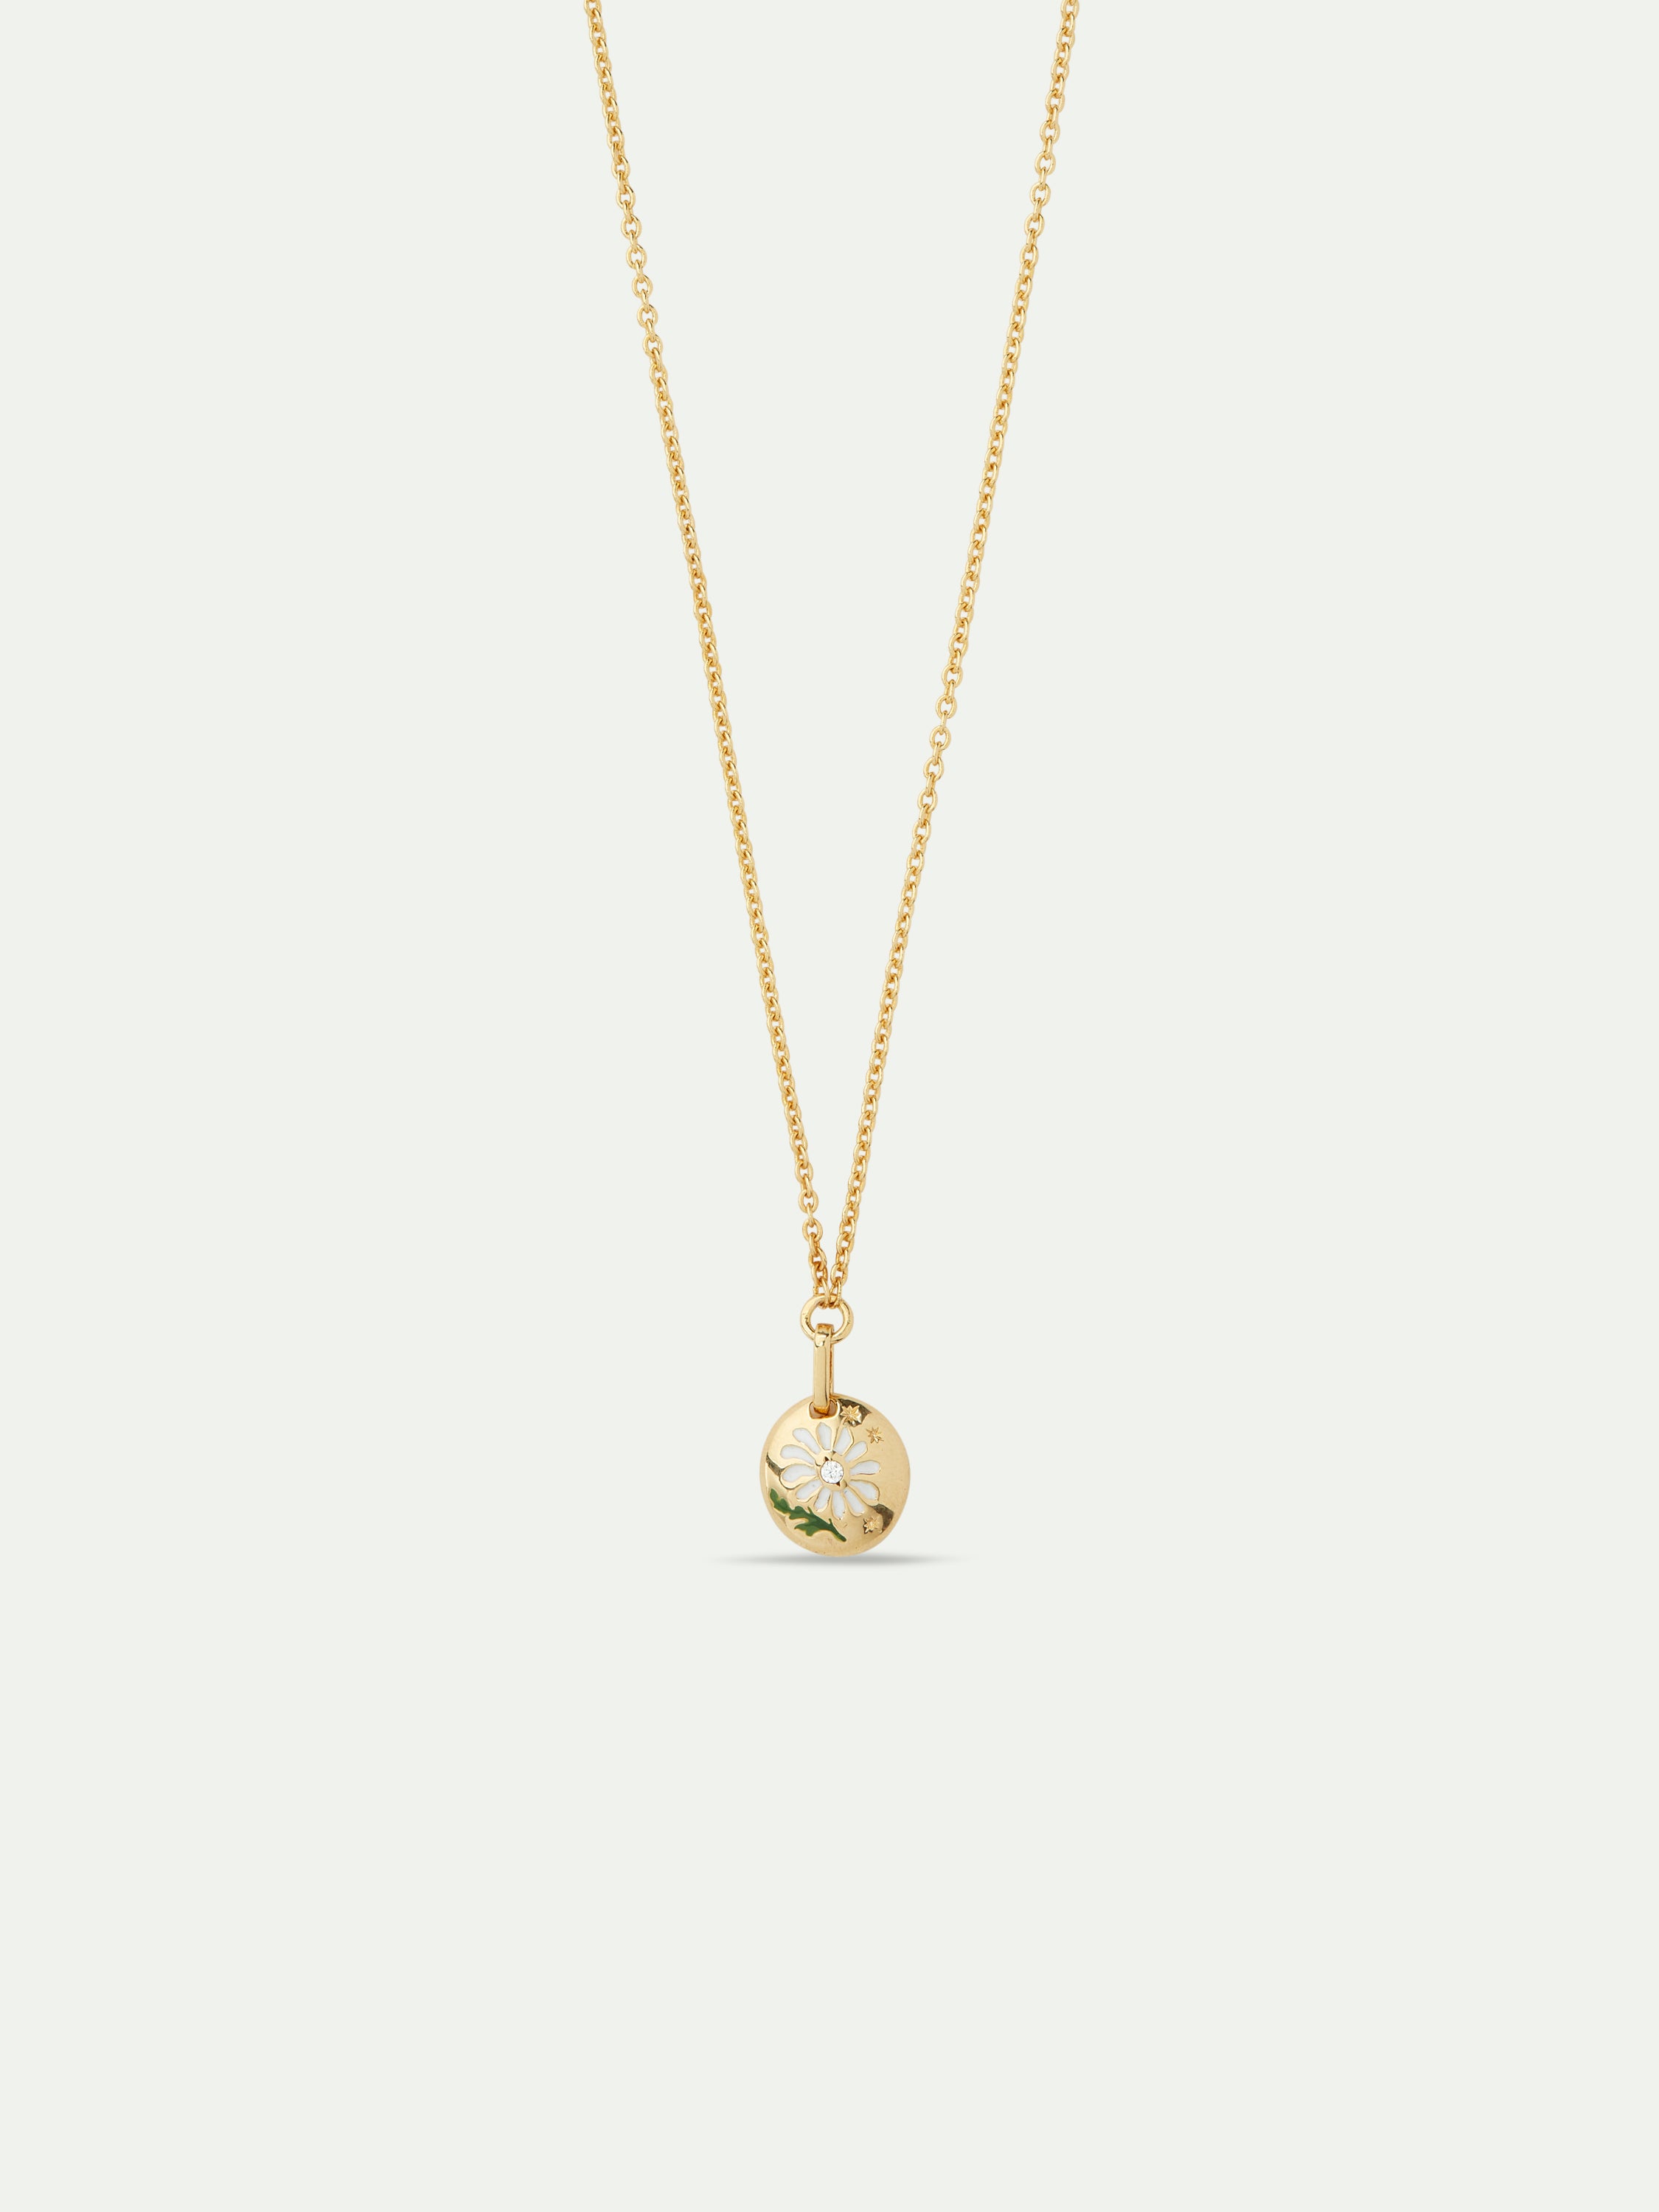 Daisy flower and medallion pendant necklace